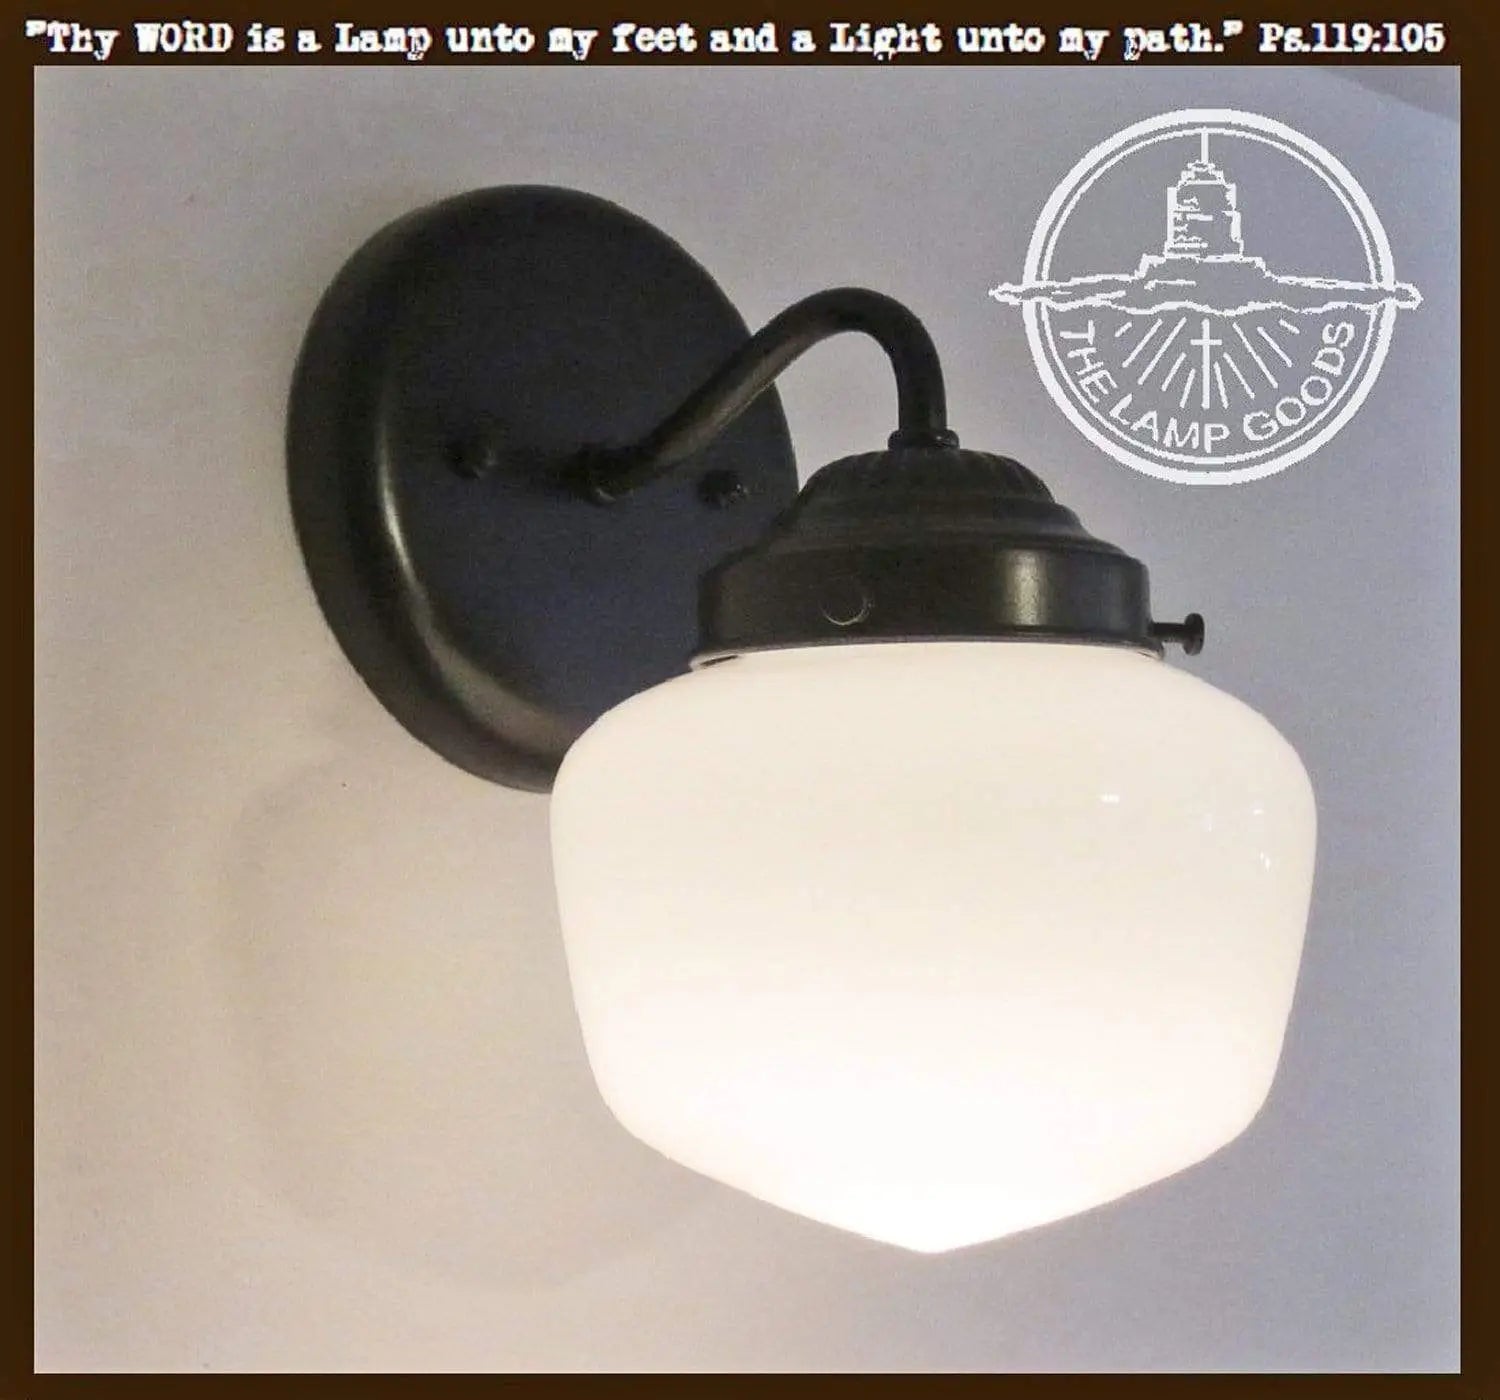 Schoolhouse Sconce Wall Light - The Lamp Goods